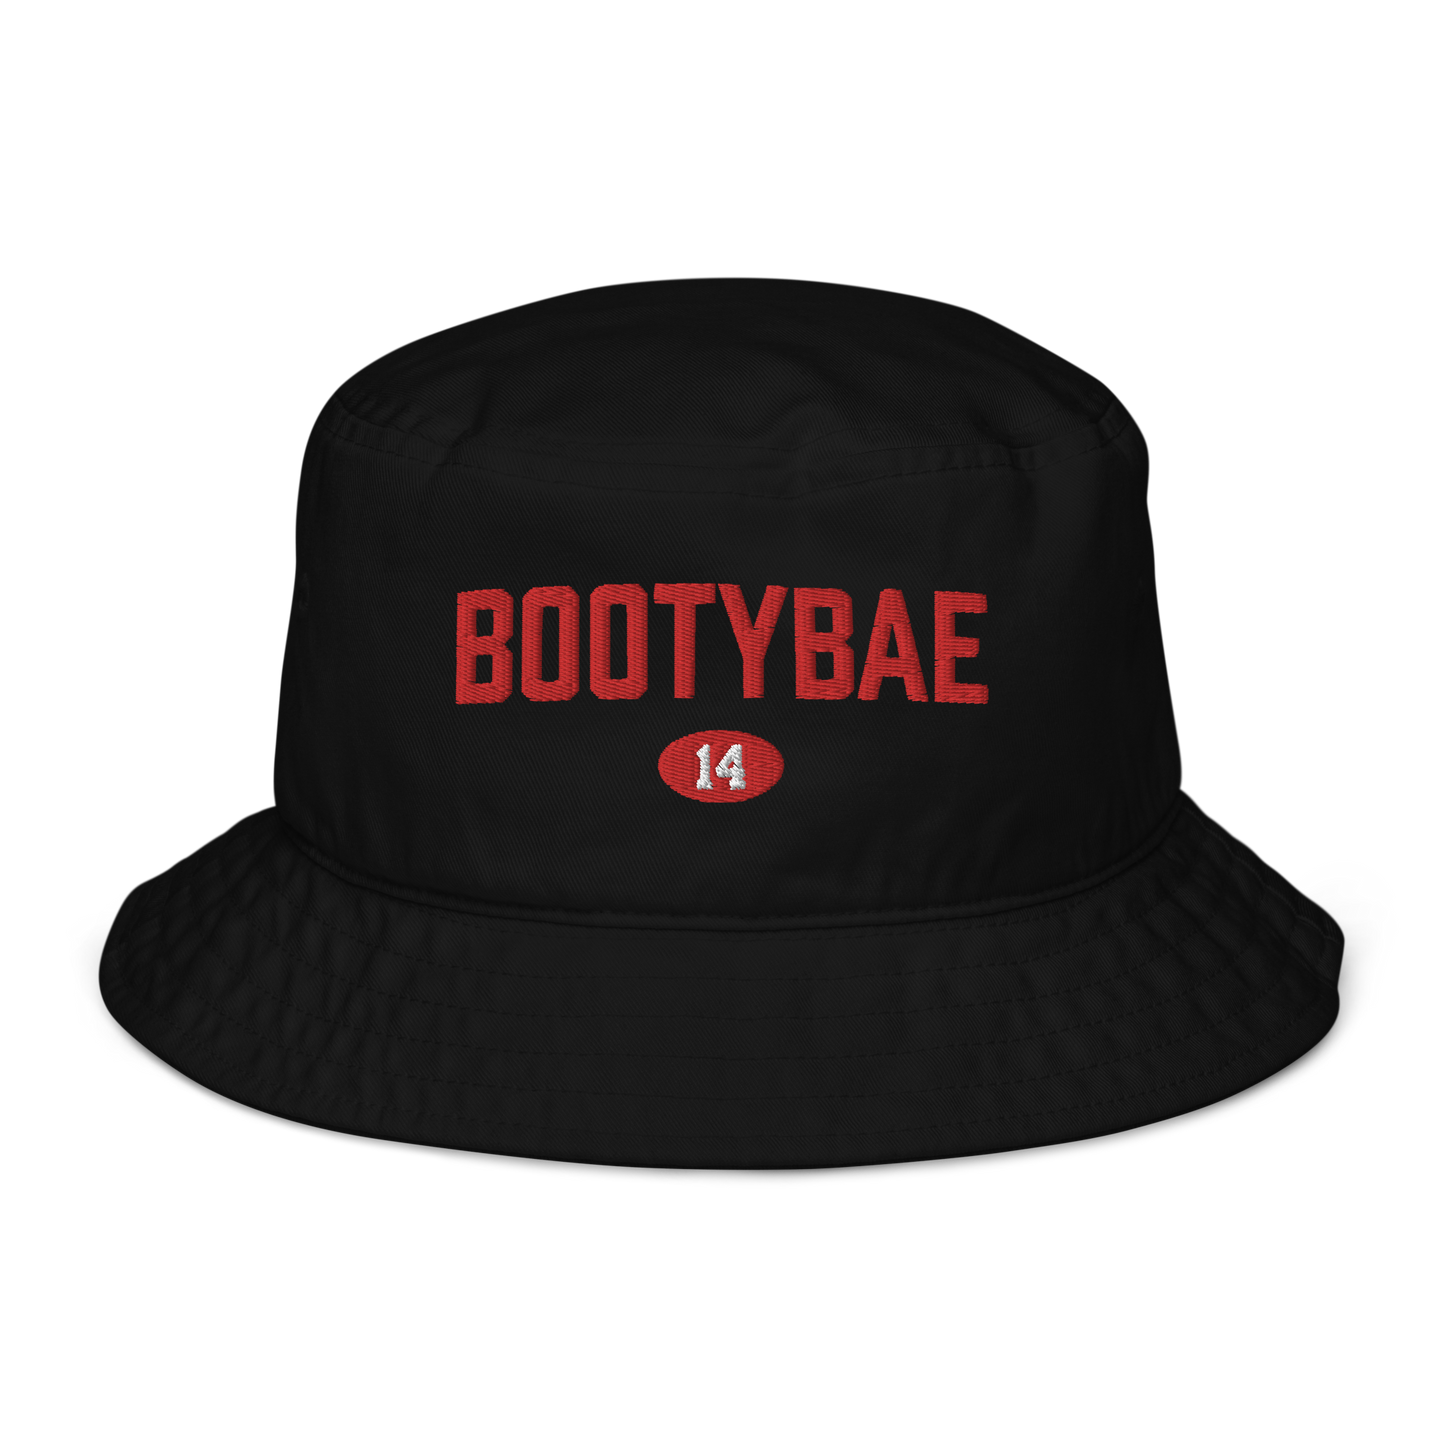 BOOTYBAE BUCKET - The General Booty Official Shop by More Than Just A Name | MTJN